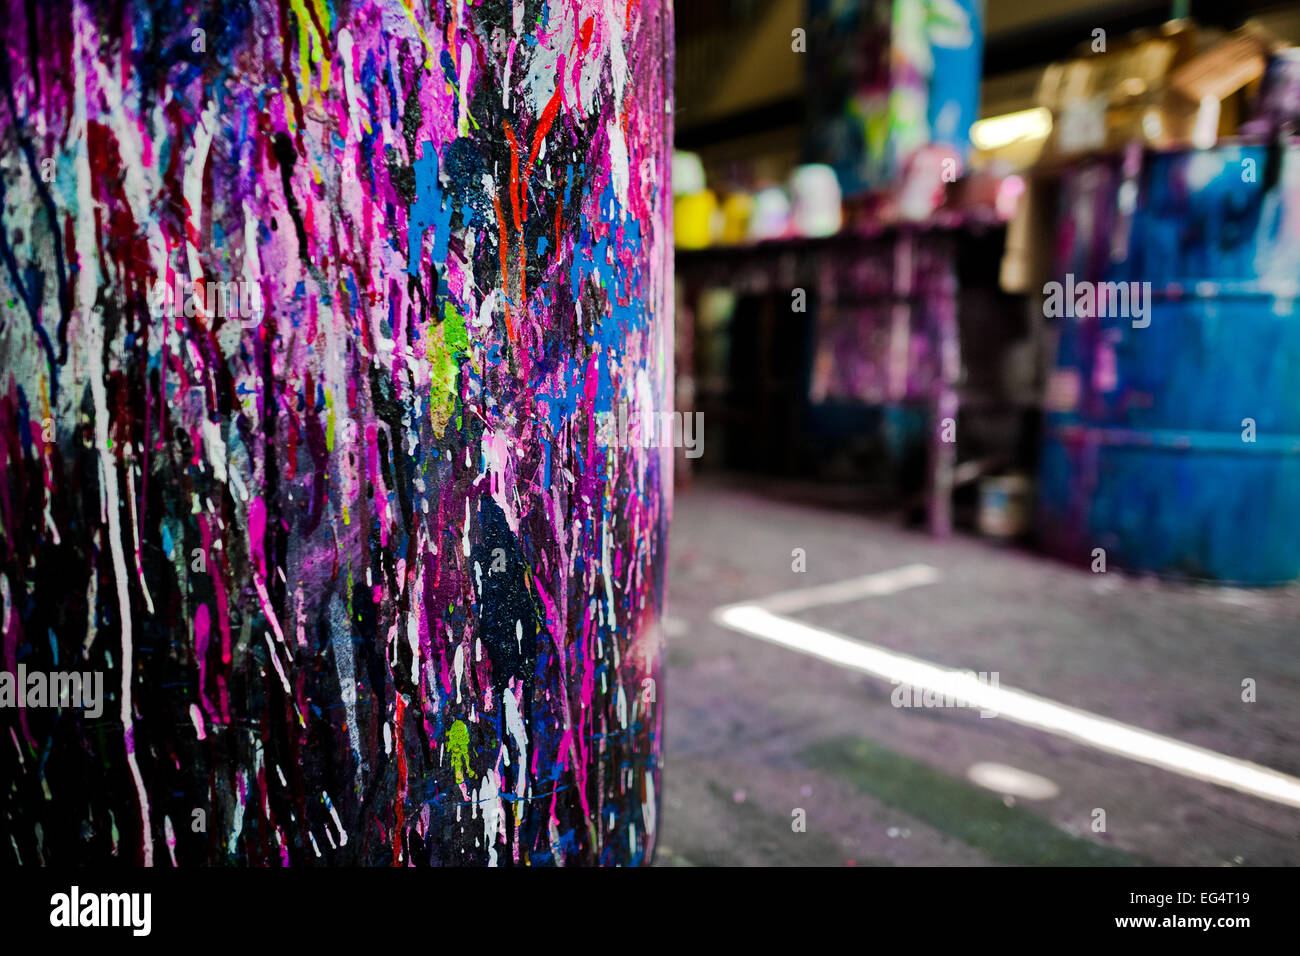 A plastic barrel, splattered with colorful paint, is seen in a small scale bicycle factory in Cali, Colombia. Stock Photo